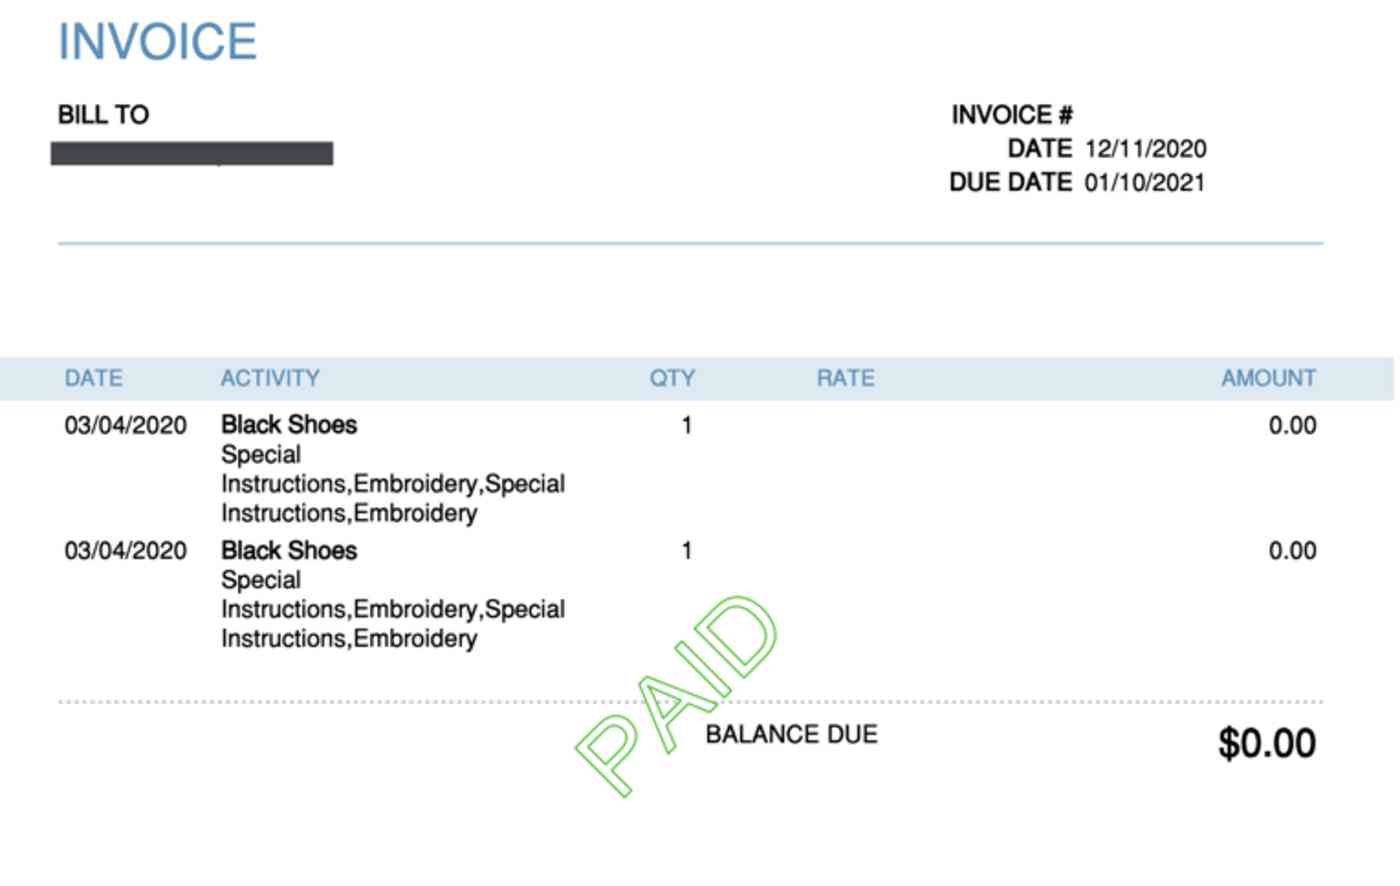 Invoice output with two items for black shoes. $0.00 balance due. "PAID" stamp. 